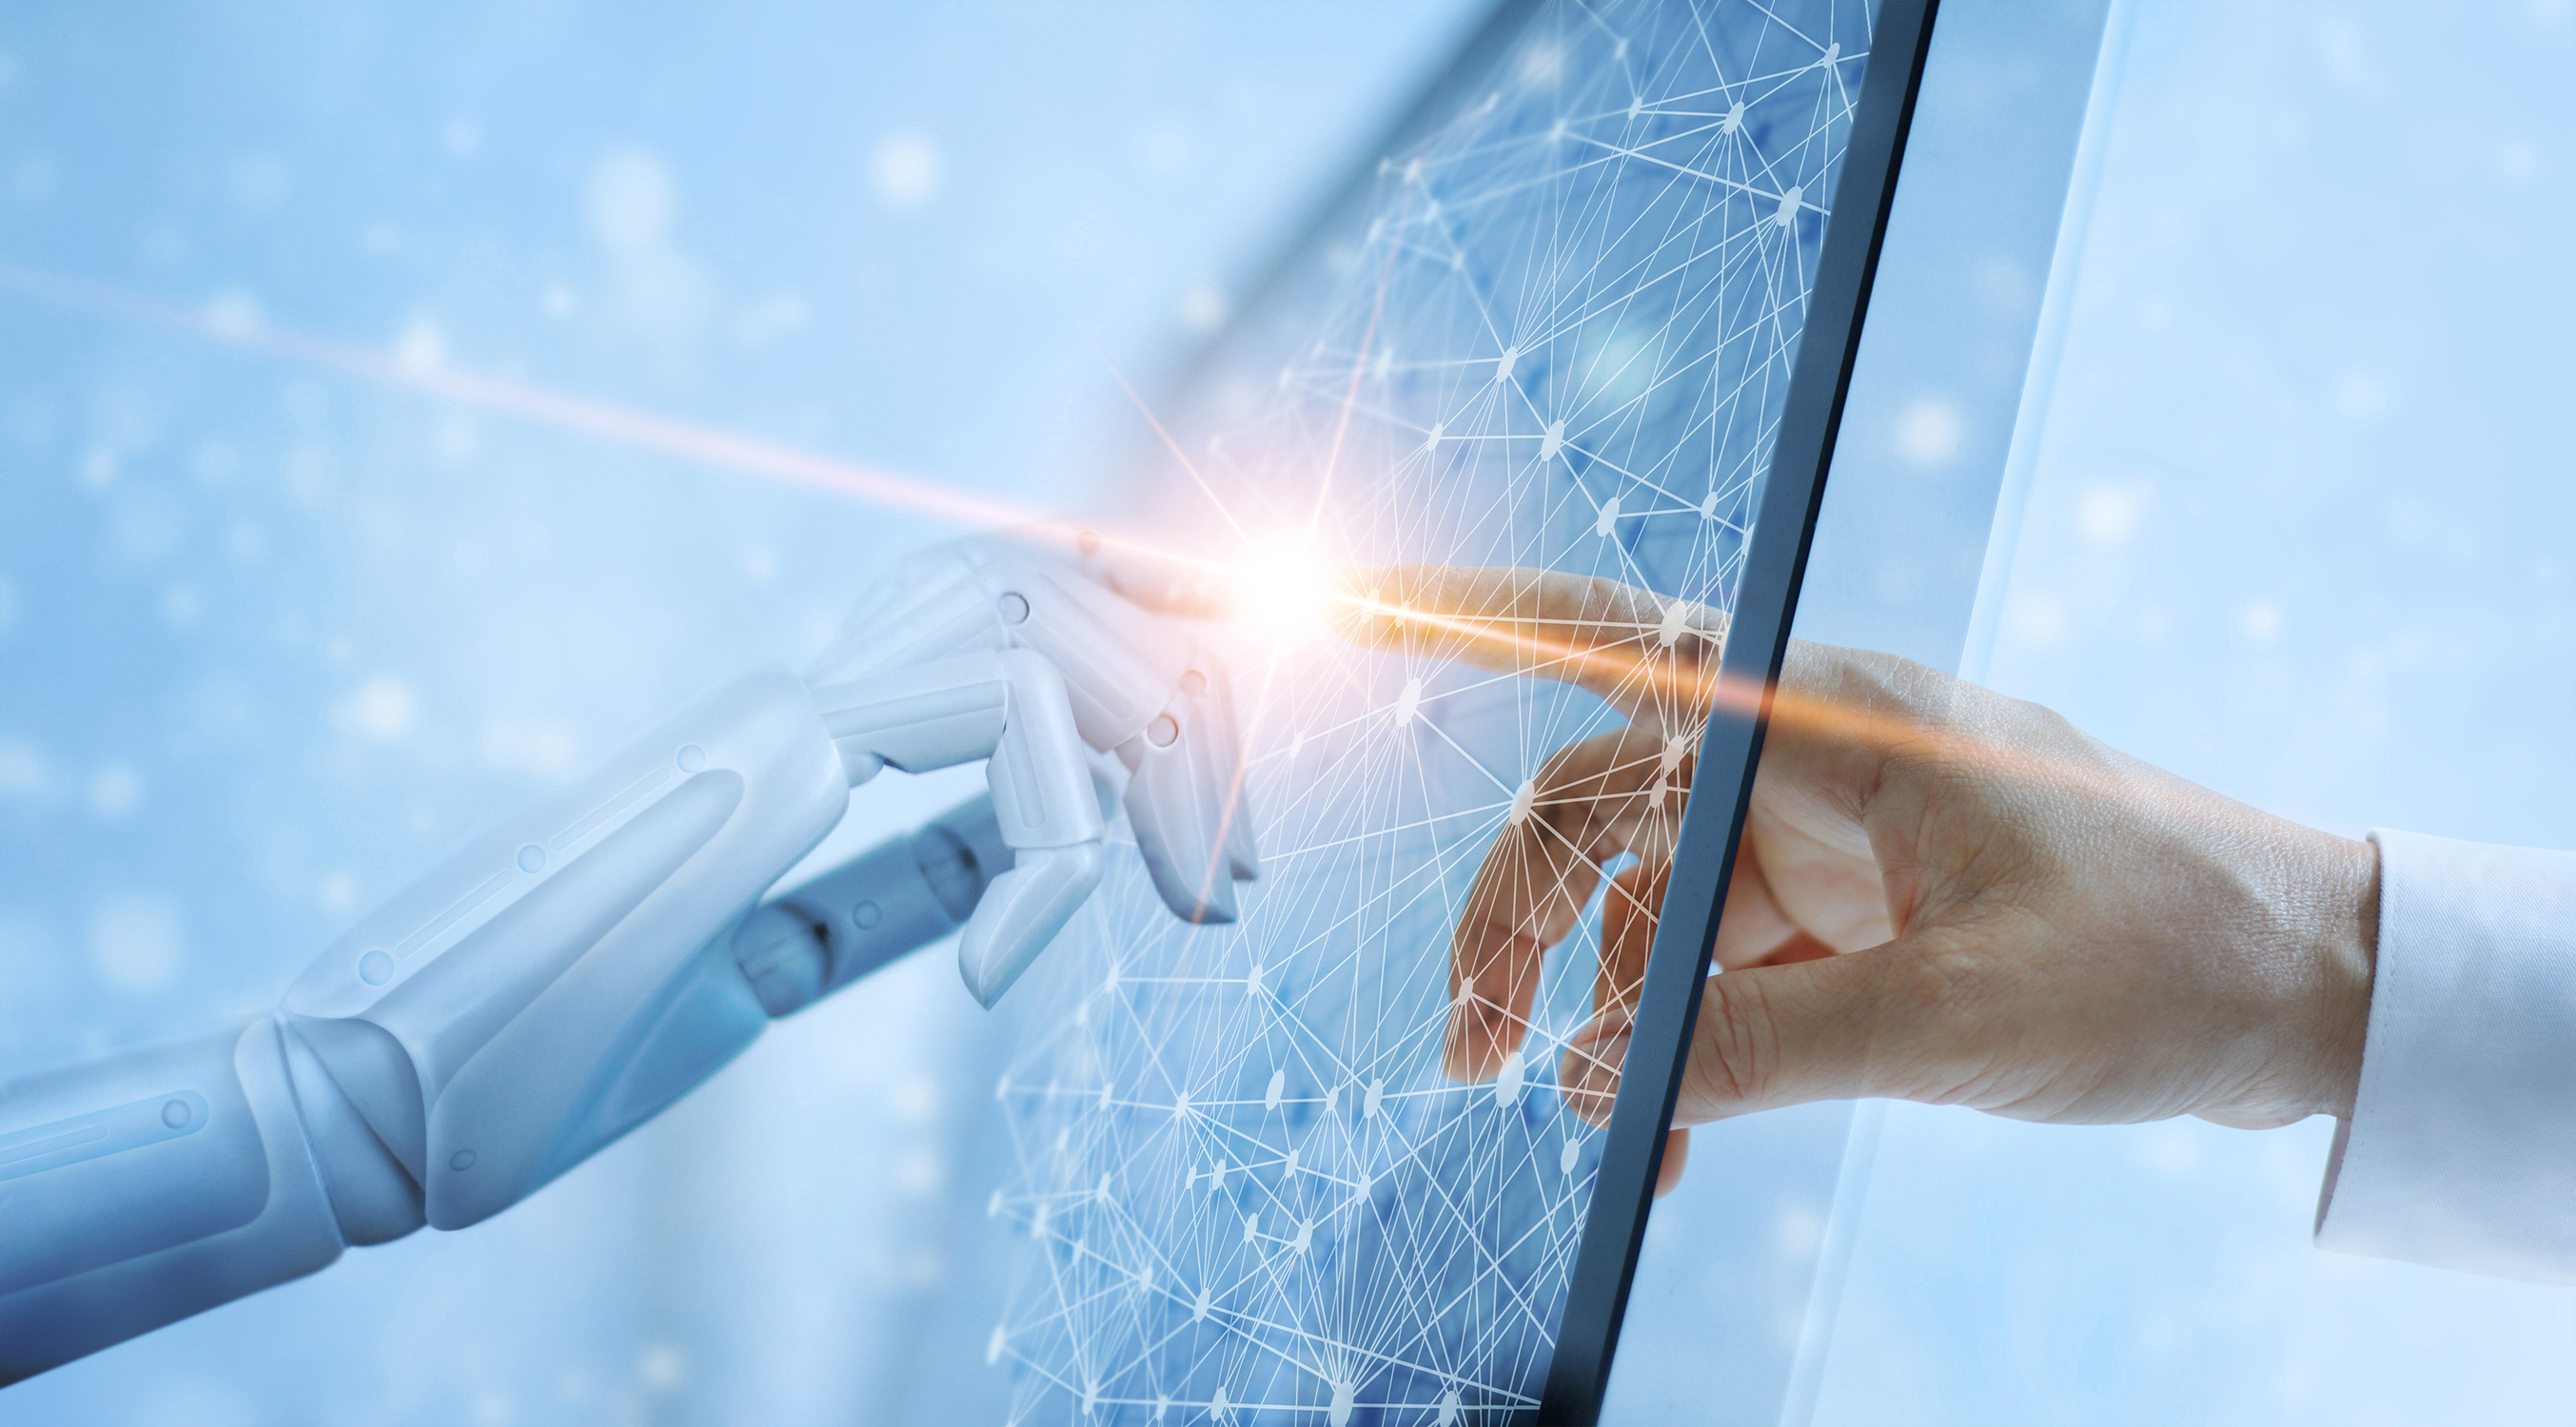 Deep learning is a highly flexible and adaptive artificial intelligence tool that, when exposed to new datasets, can increase its ability to identify patterns and classify relationships between data (Source: Istock Copyright: ipopba ID: 1051617224).